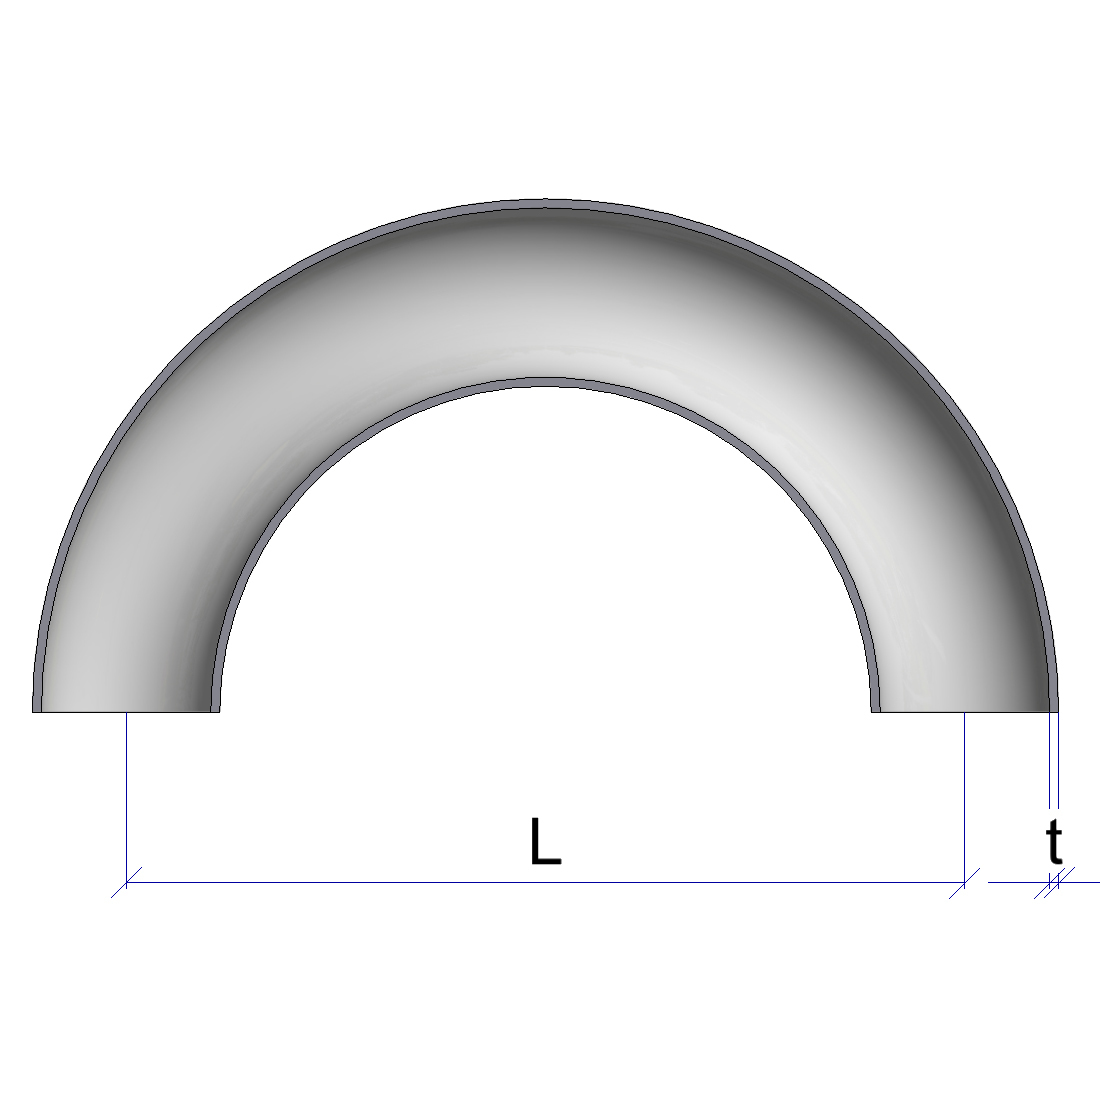 Elbow-180-5S-DIN2605-Dimensions-1A